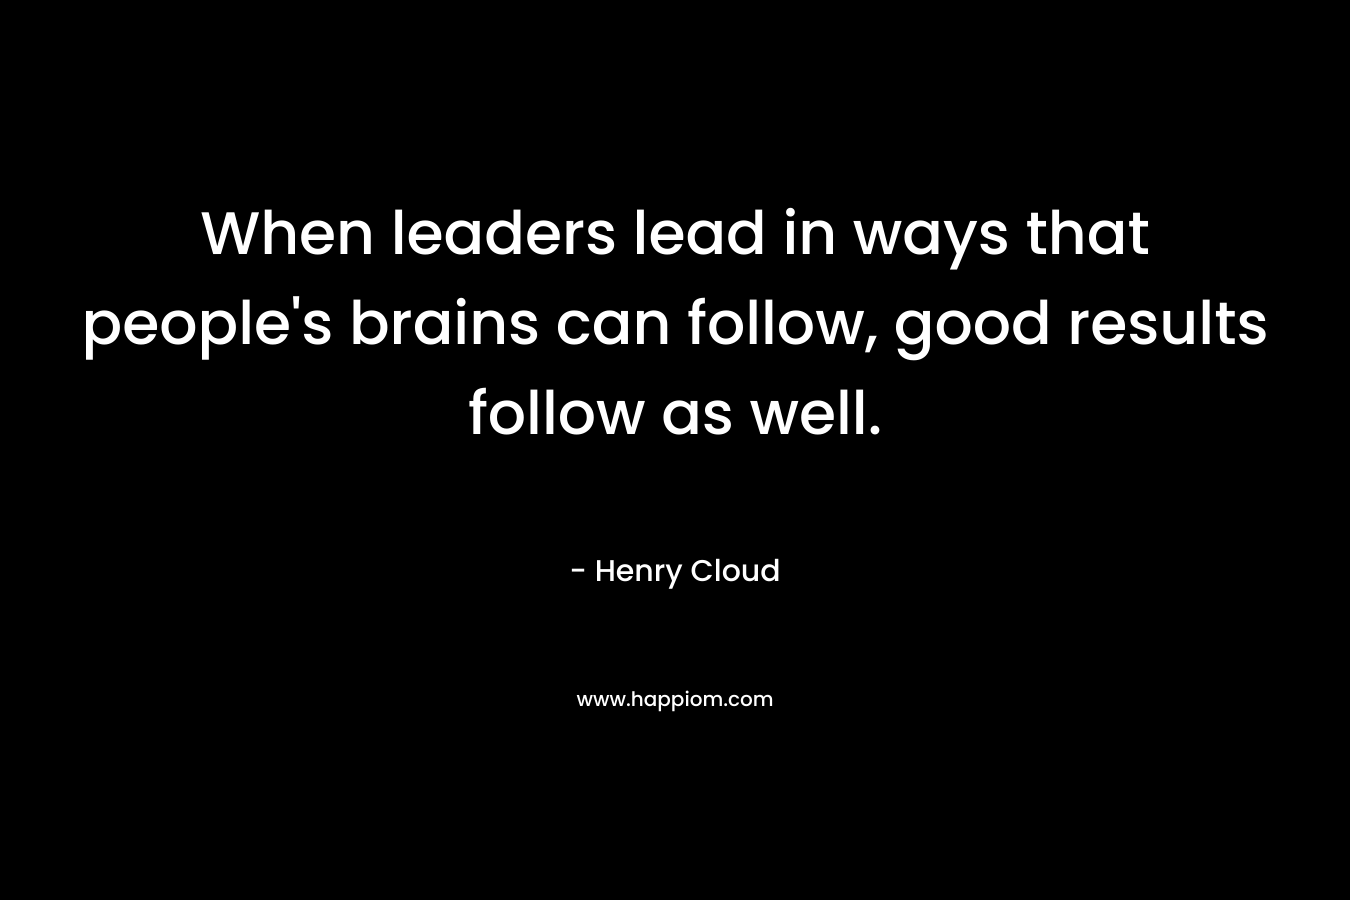 When leaders lead in ways that people's brains can follow, good results follow as well.